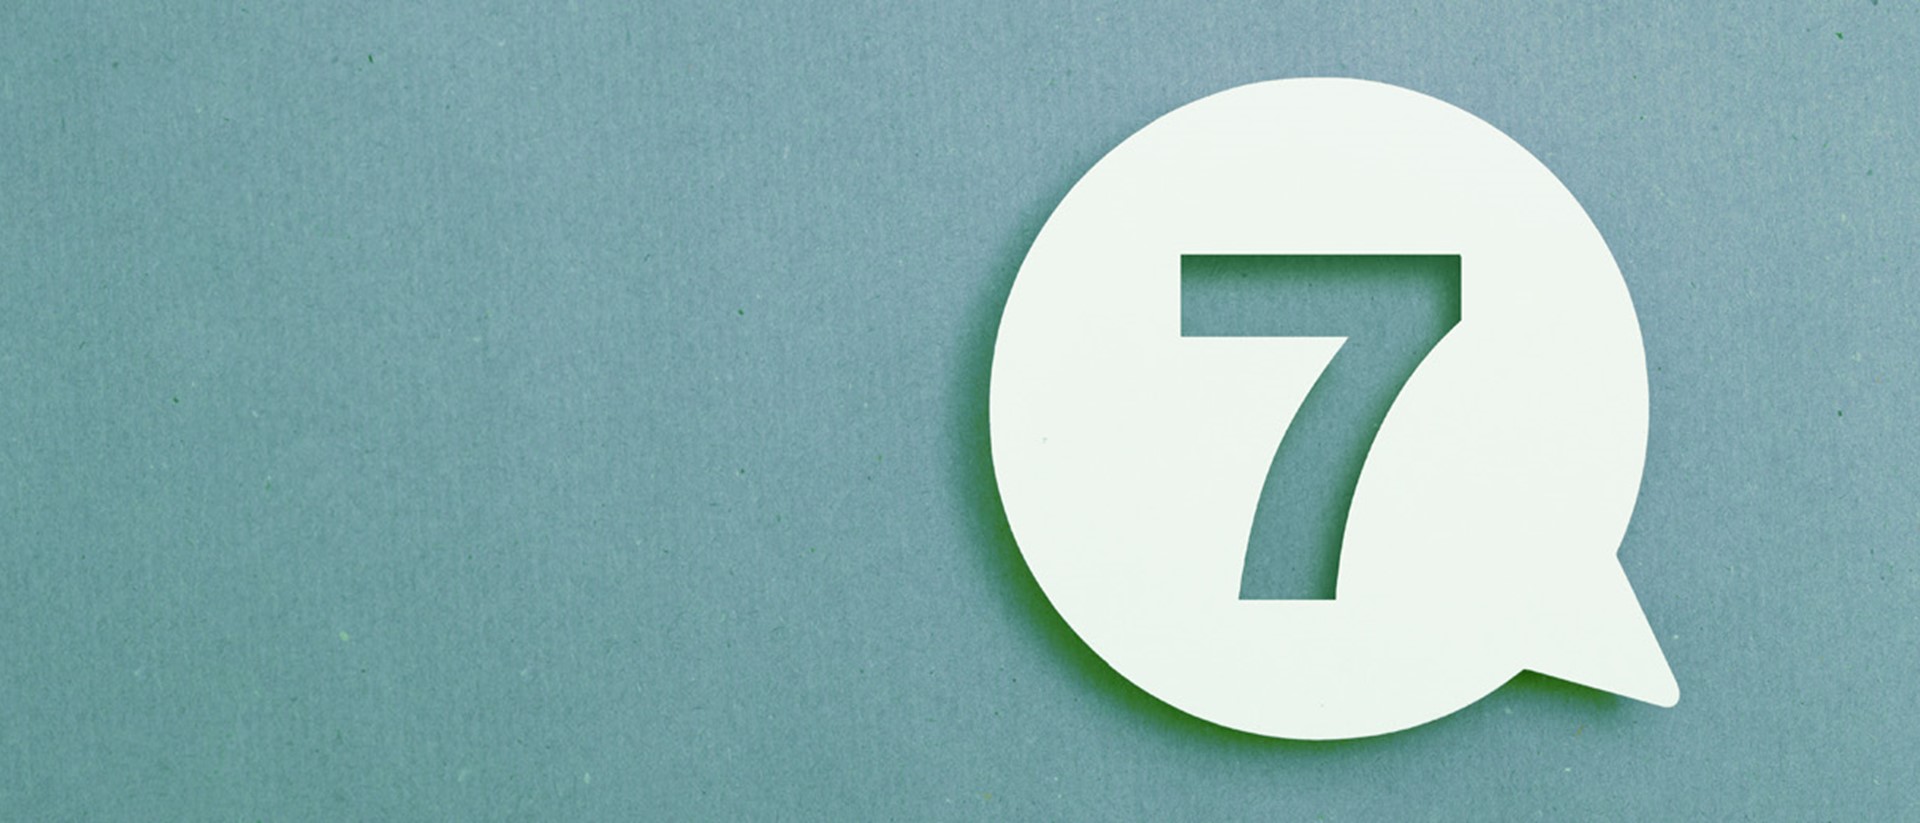 The number seven in a speech bubble against a teal background